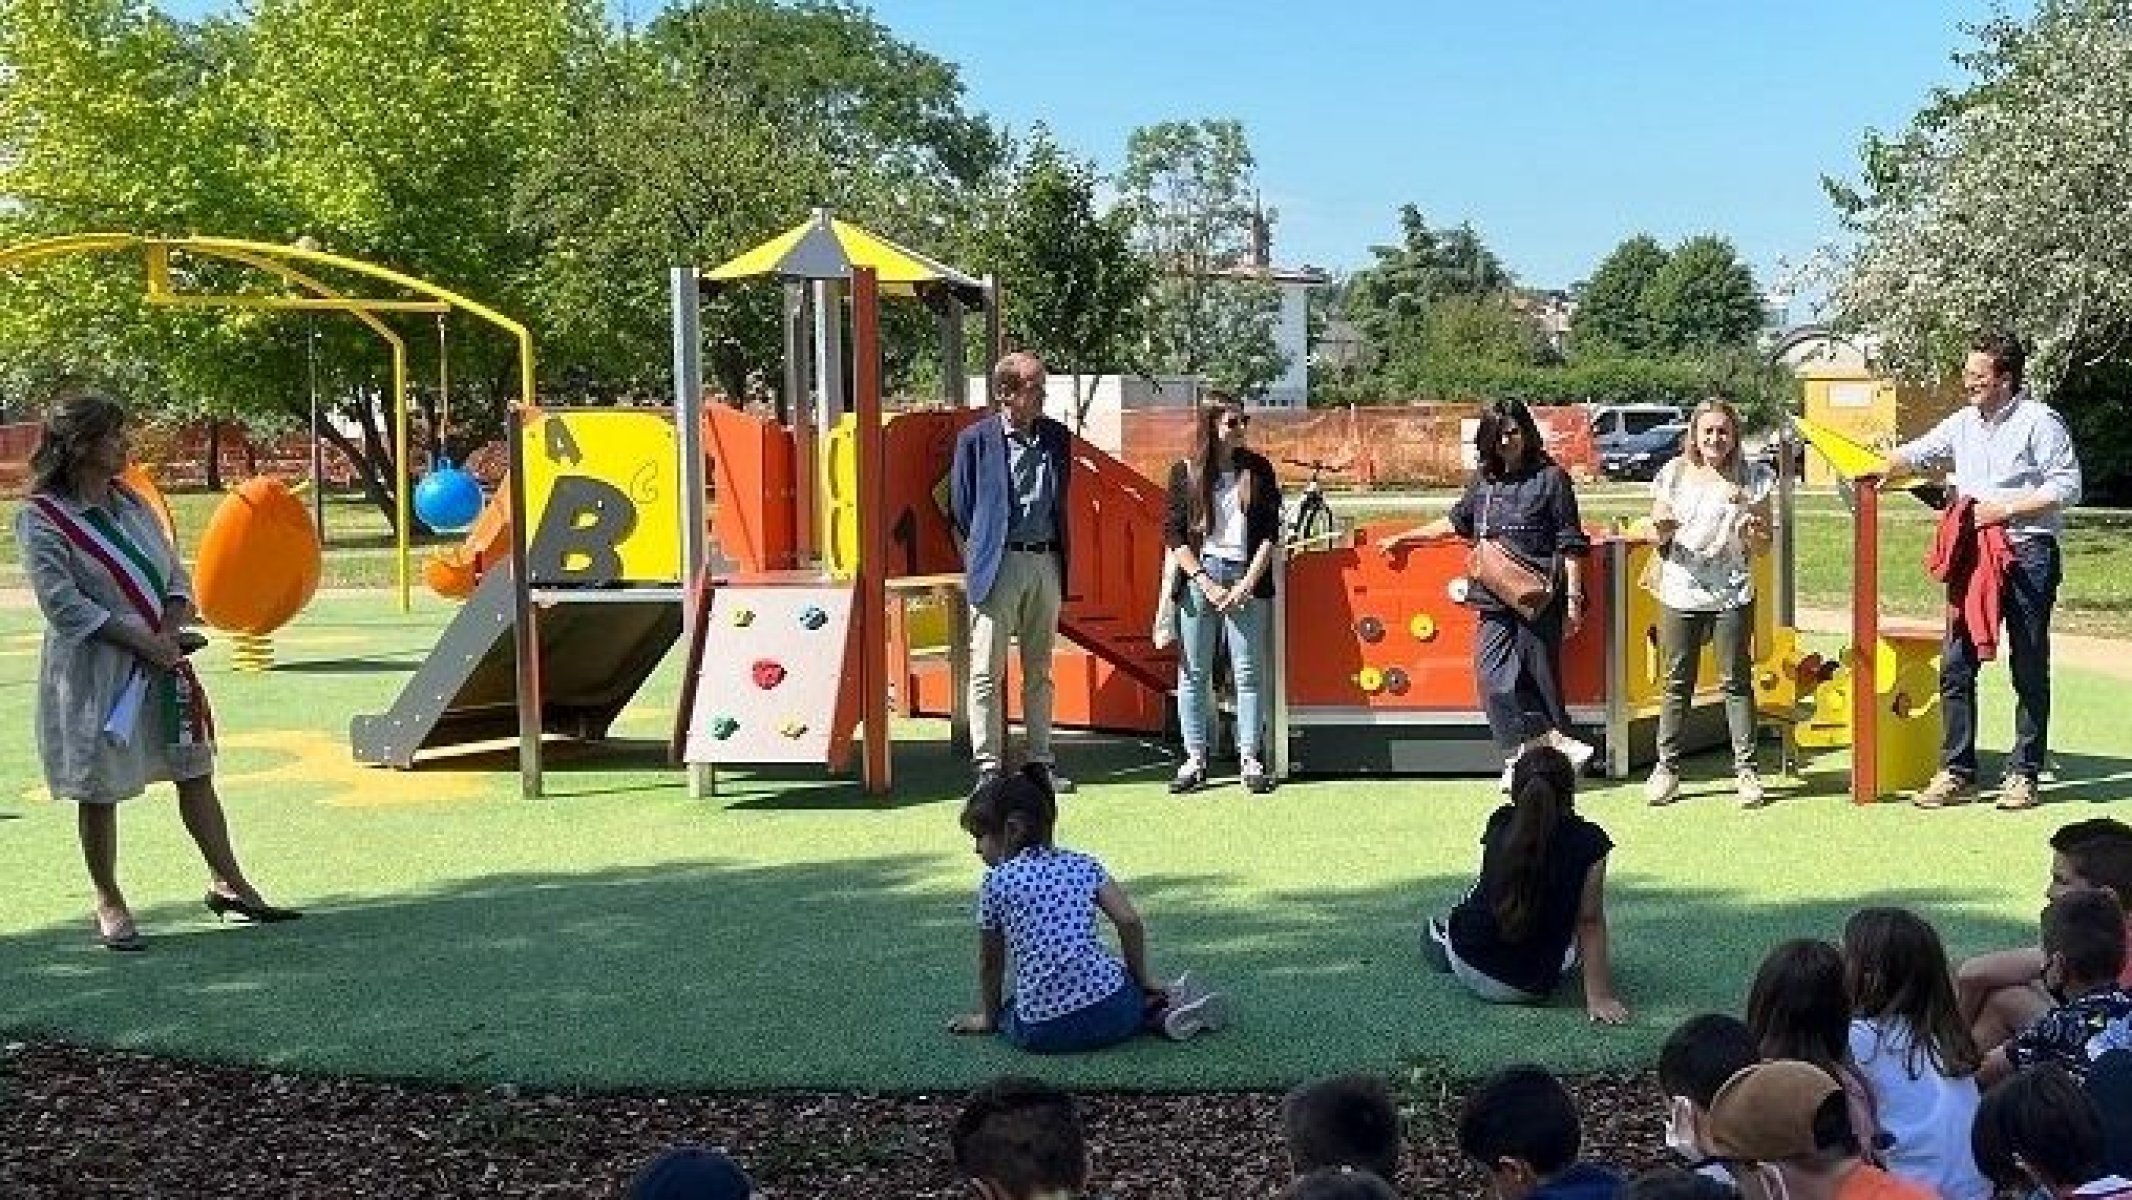 Parma Daily talks about our new Park inclusive of Collecchio